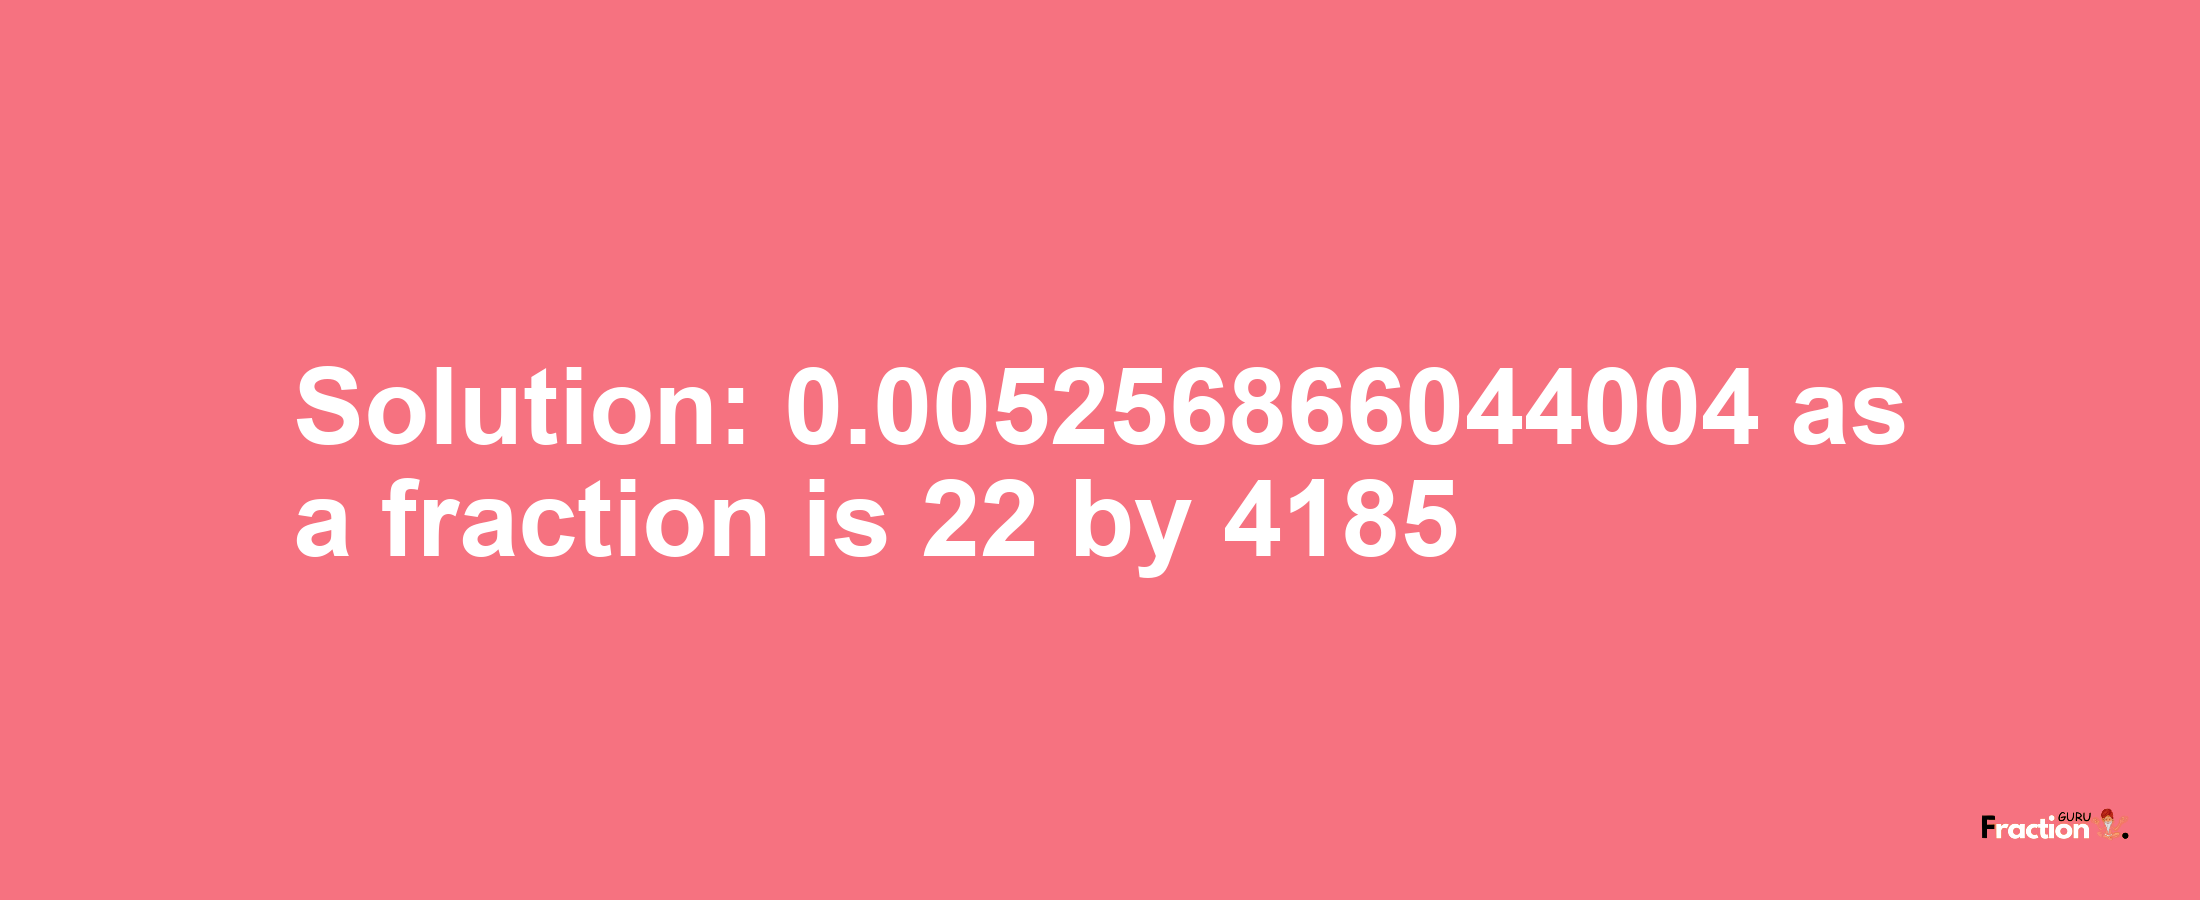 Solution:0.005256866044004 as a fraction is 22/4185